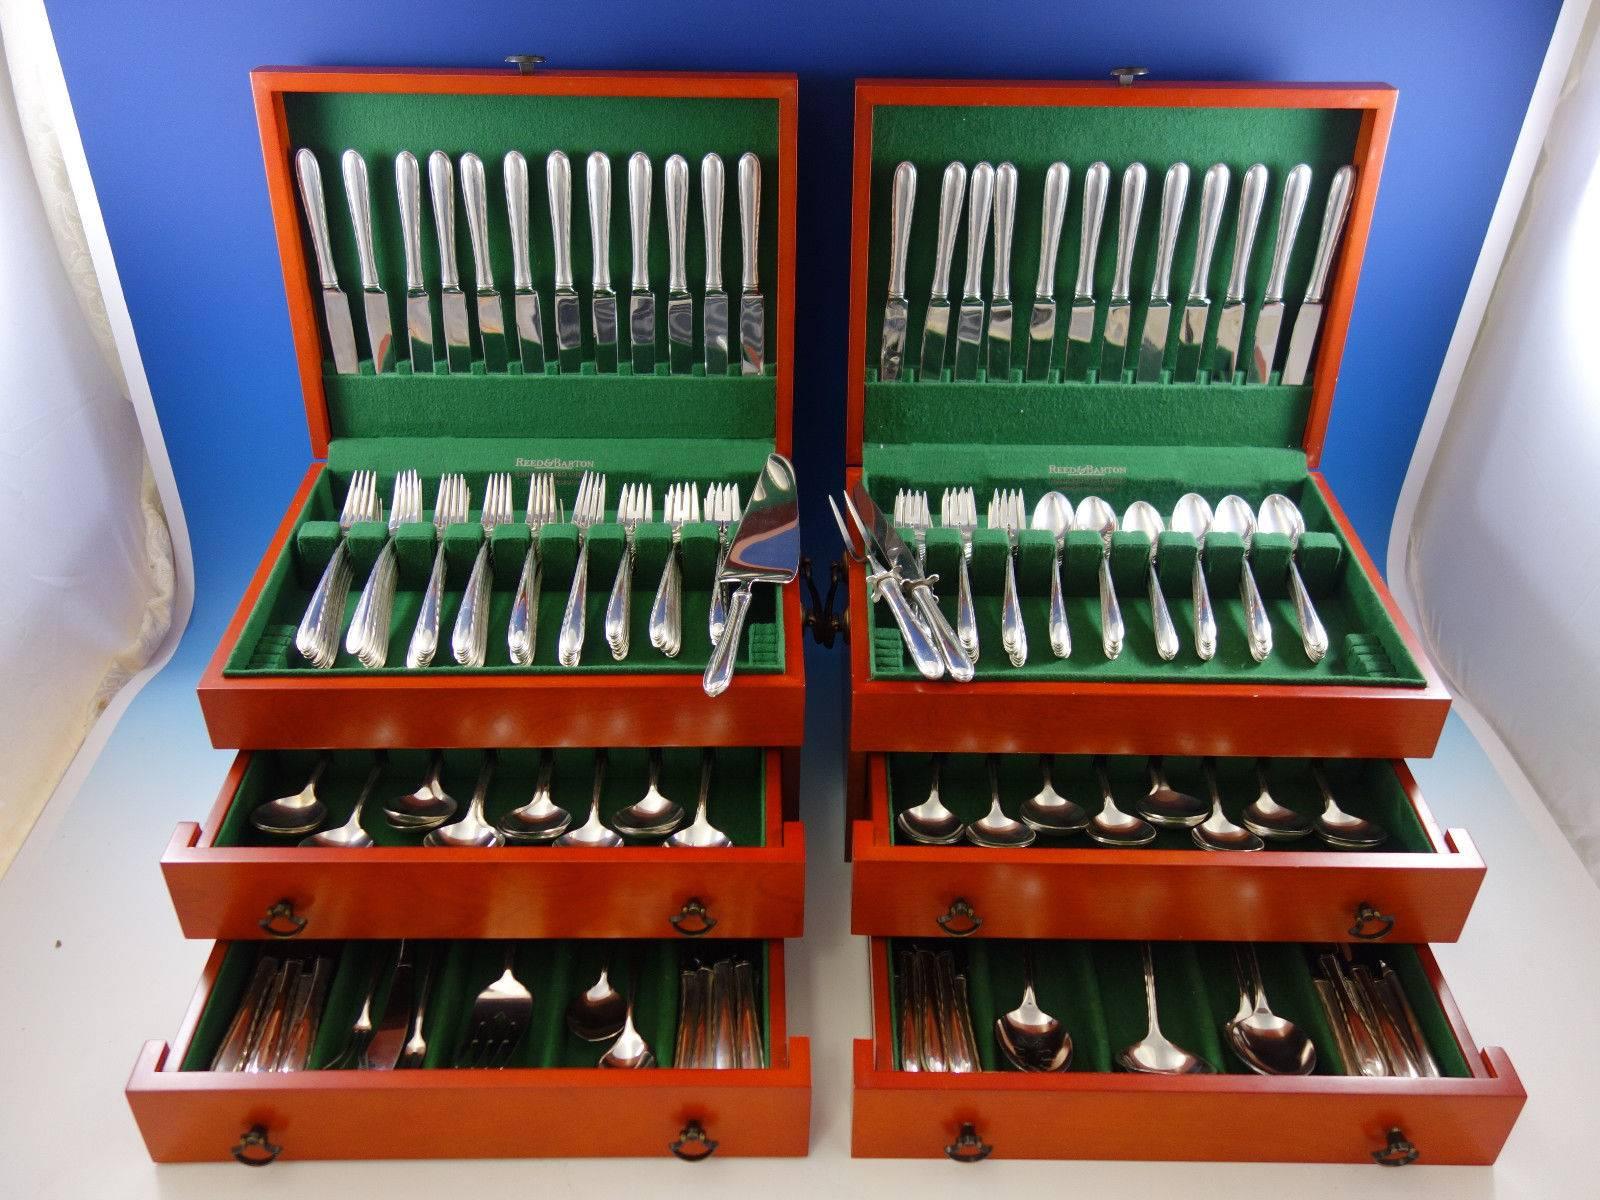 Silver Flutes by Towle Sterling Silver Flatware set - 253 pieces. This large set includes: 

48 Knives, 8 7/8